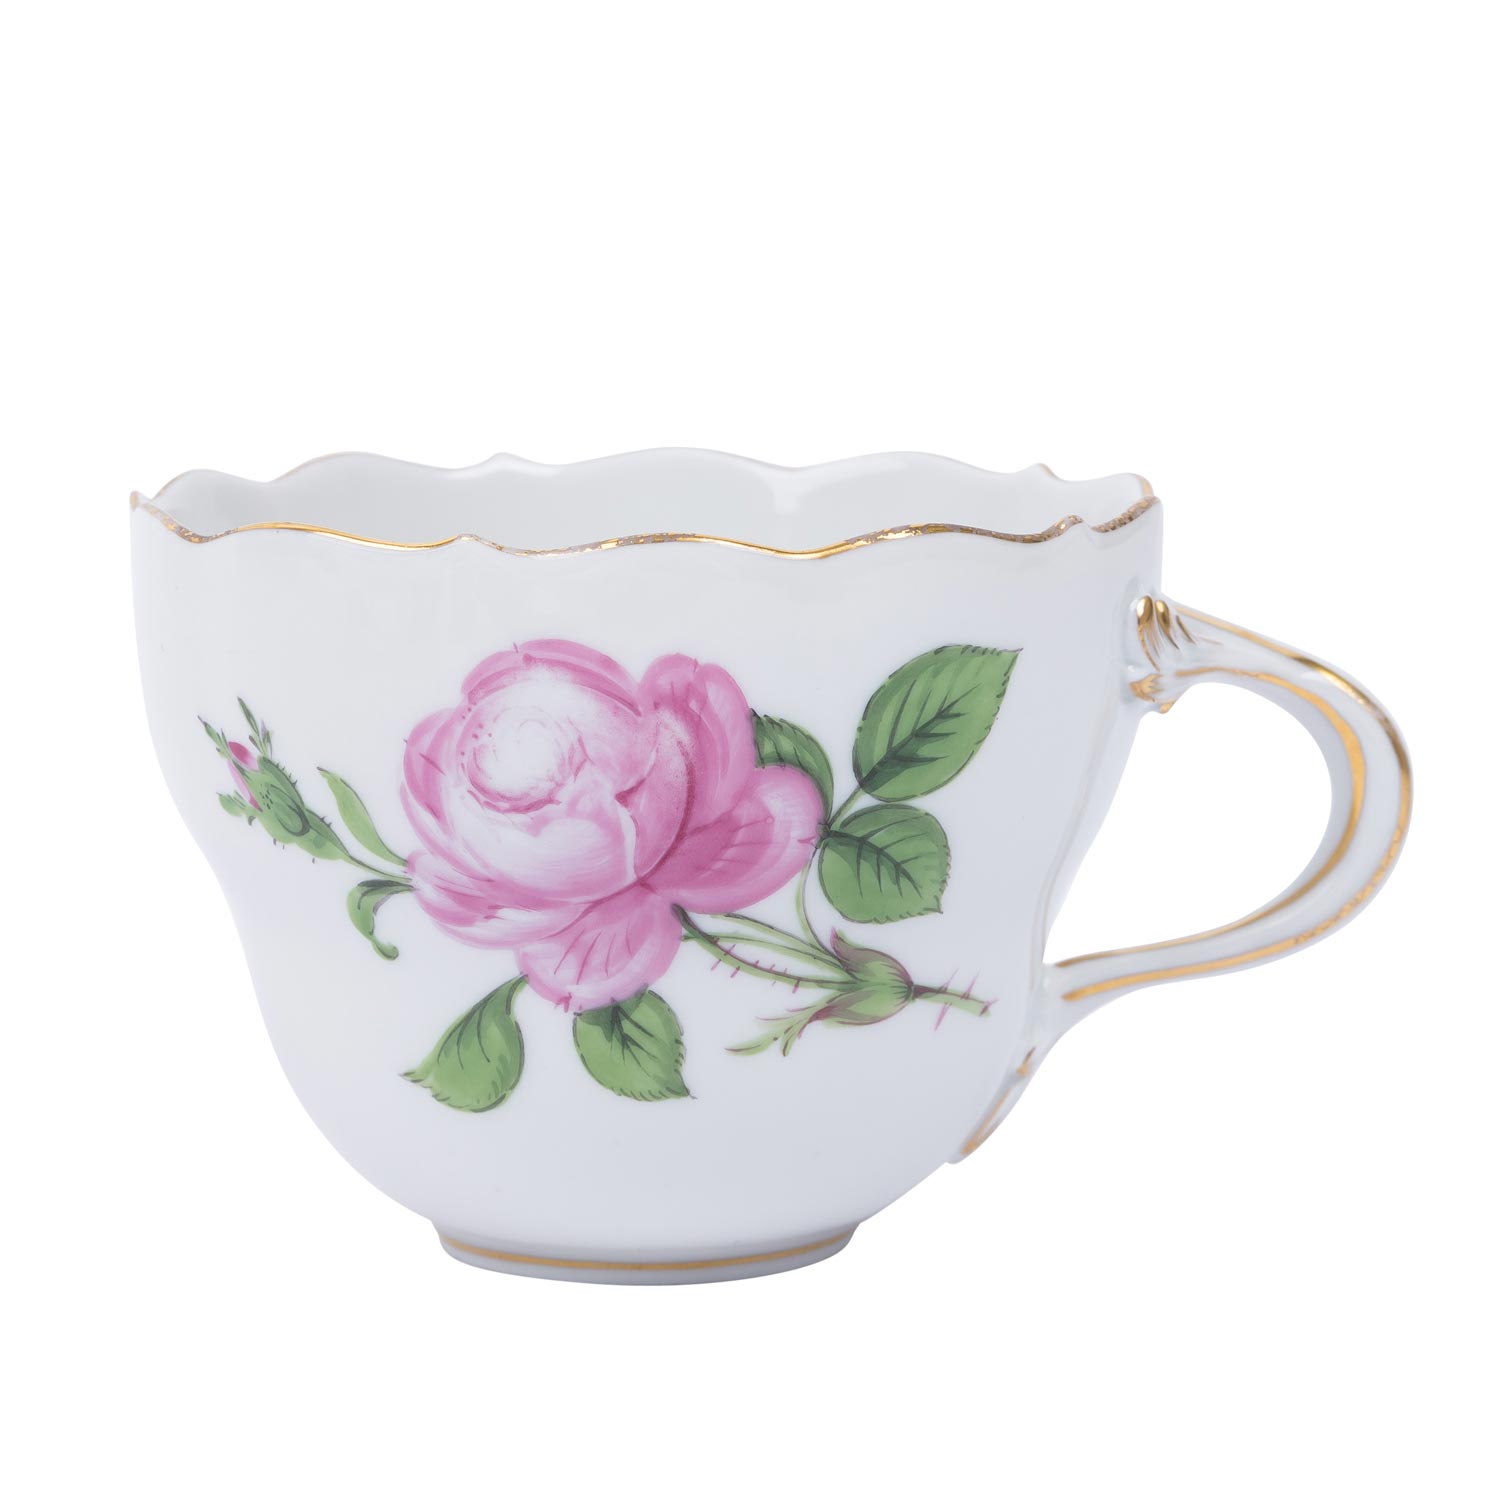 MEISSEN 5 Serviceteile 'Rote Rose', 2. Wahl, 20. Jh. - Image 4 of 5